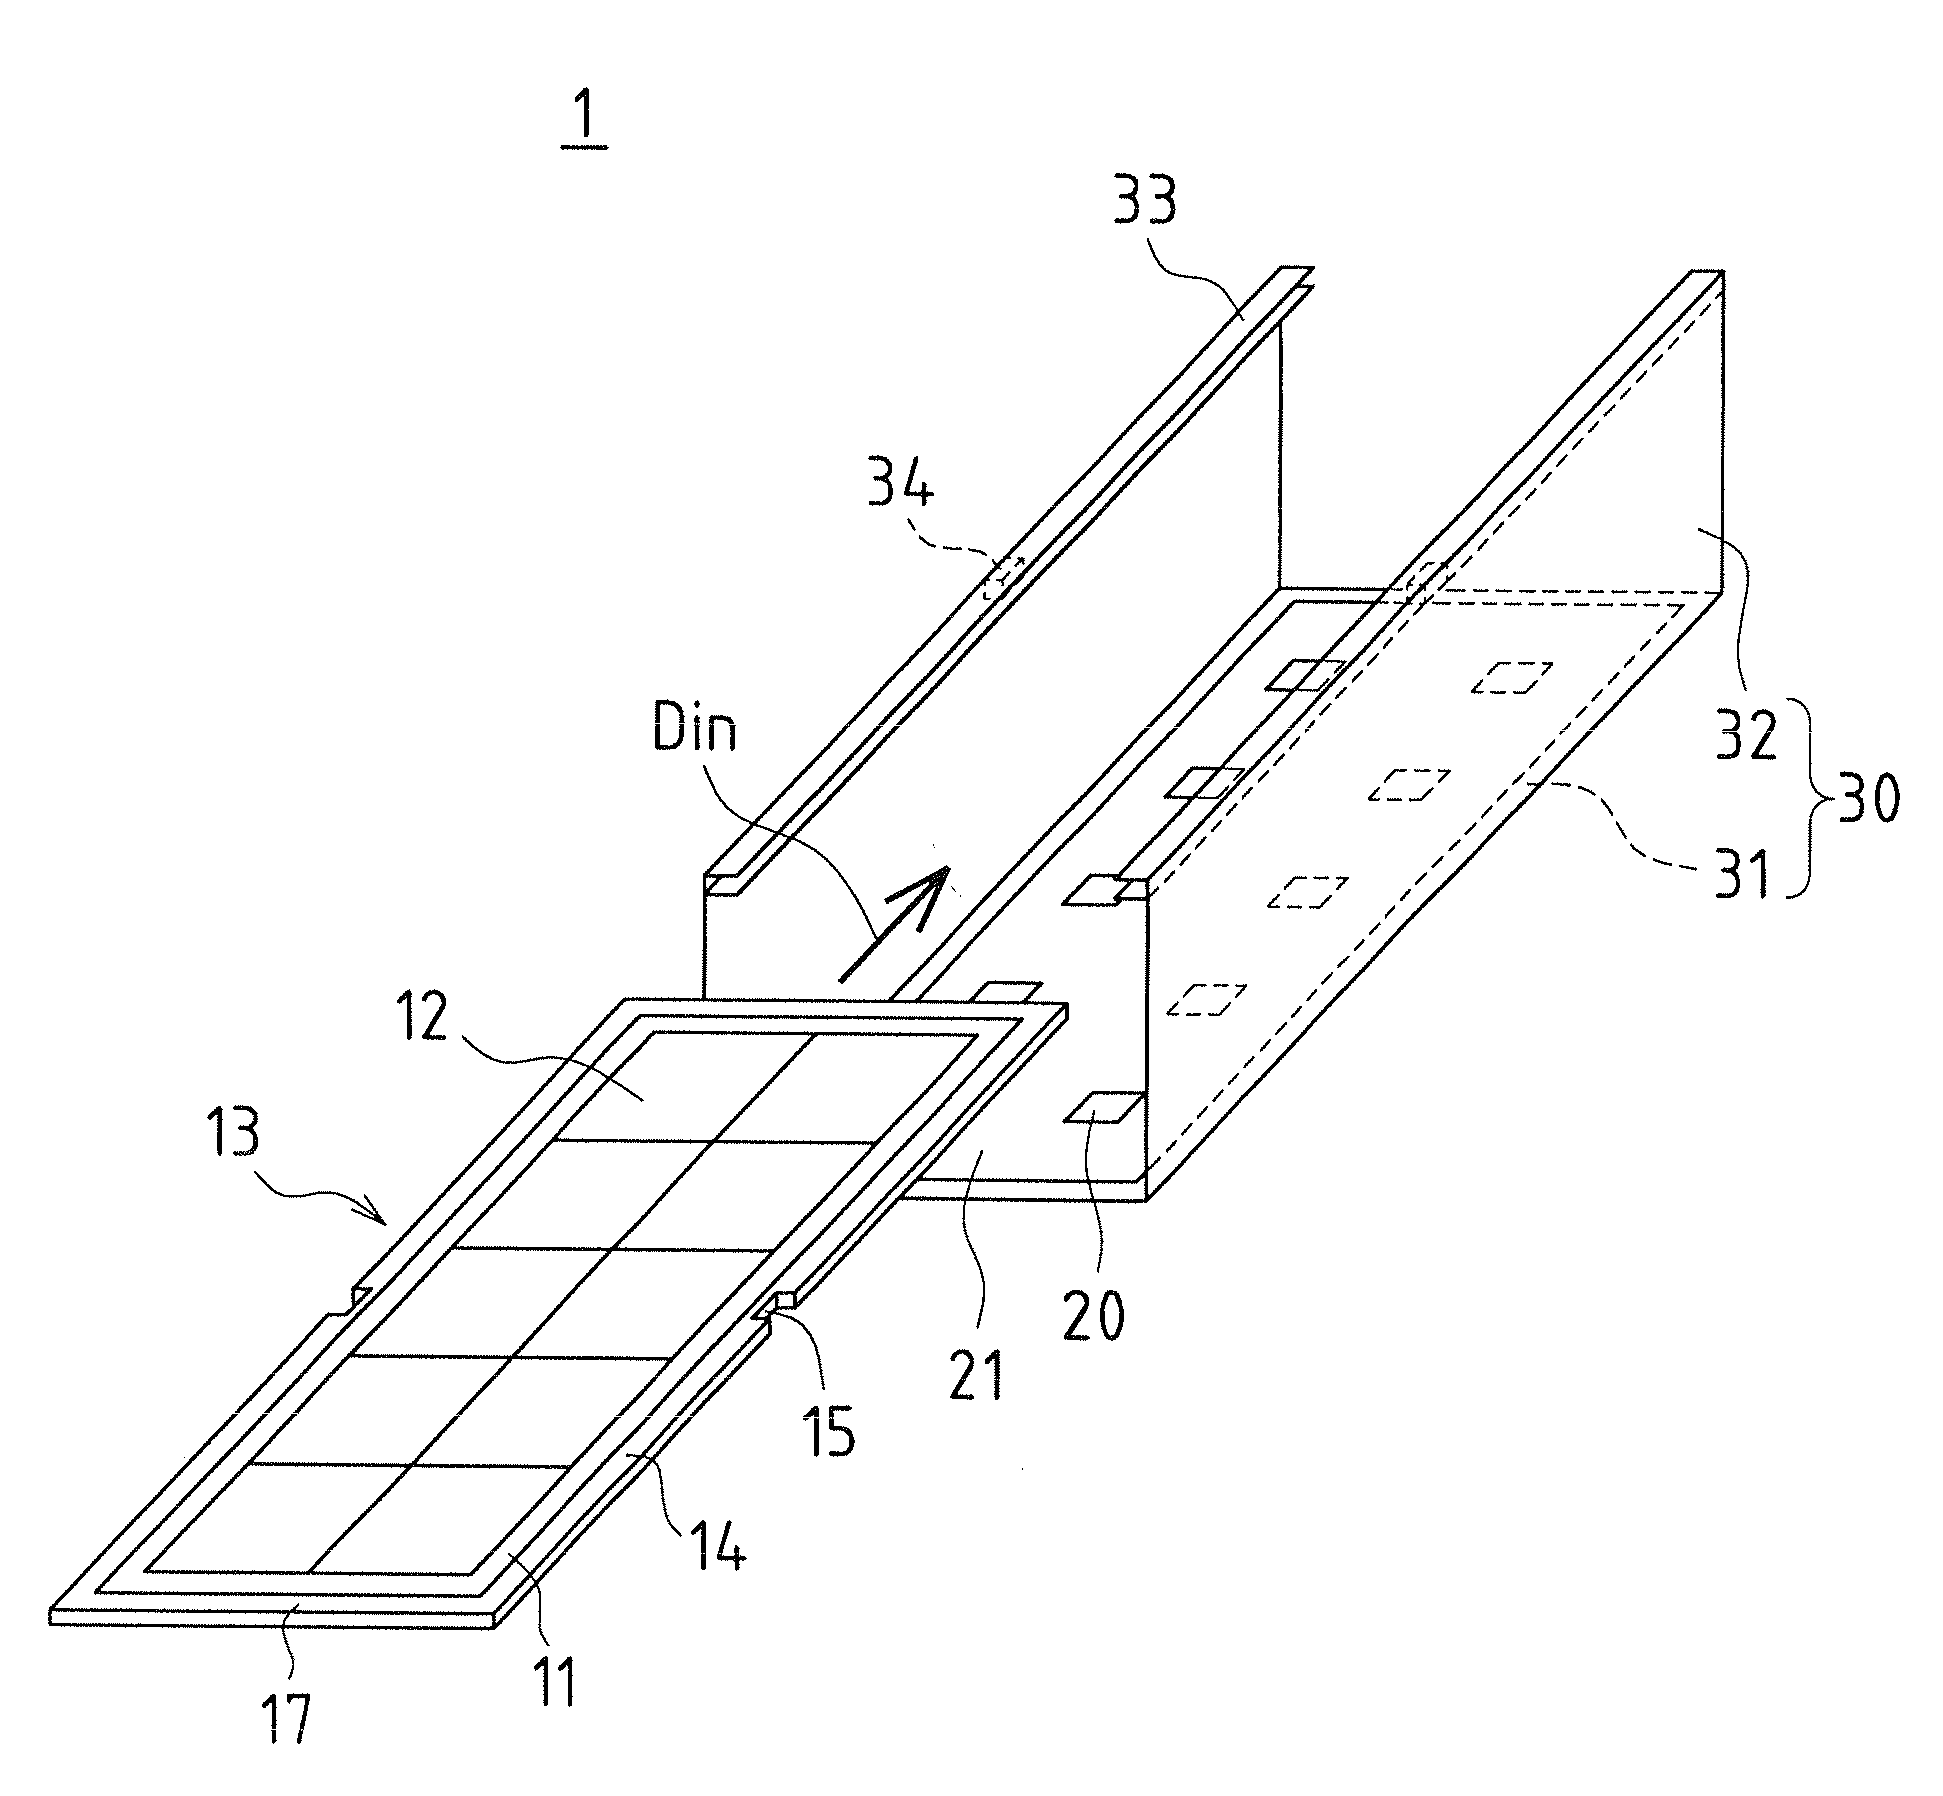 Concentrating solar power generation unit and method for manufacturing a concentrating solar power generation unit